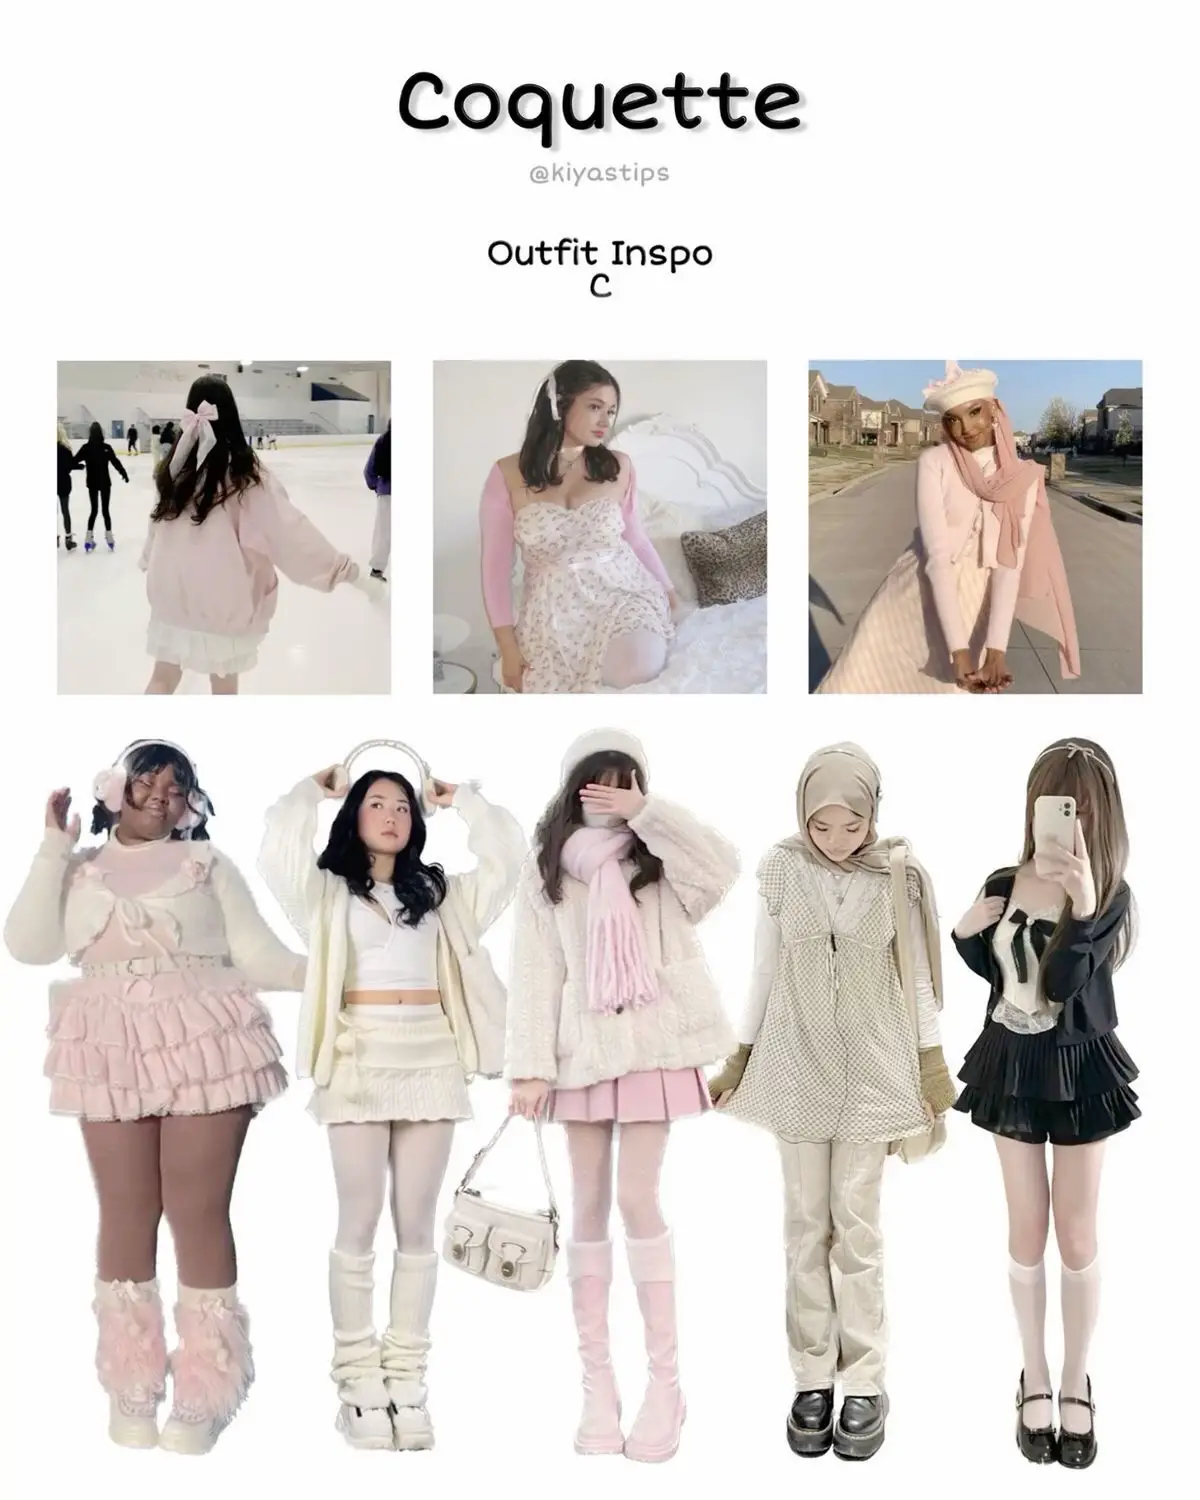 aesthetic coquette outfit 💌🤎  Downtown outfits, Cute outfits